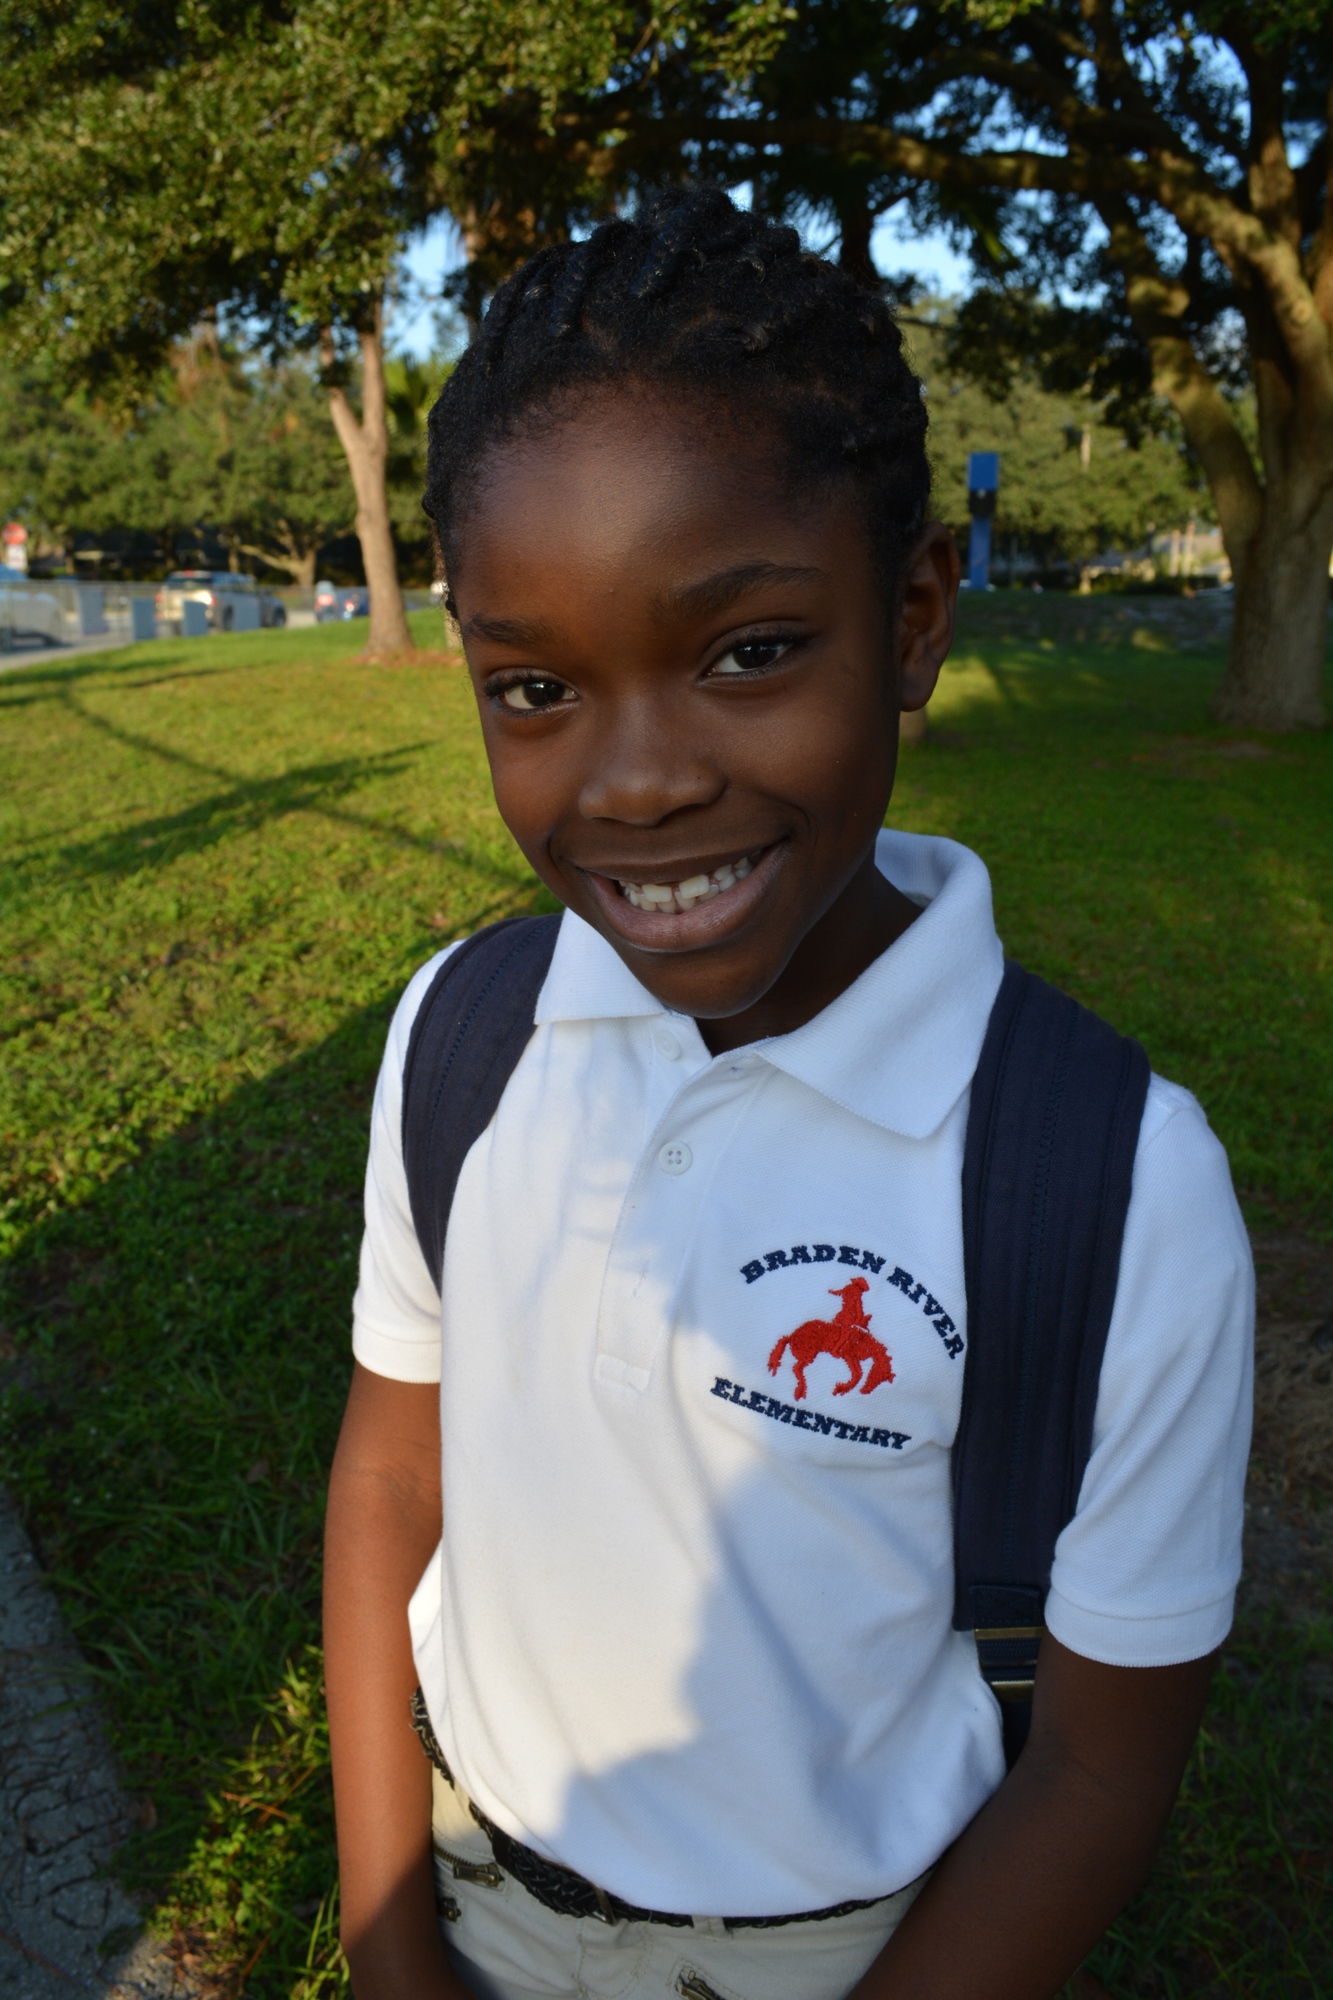 Jassee Alexis, 7 enjoys walking with friends.